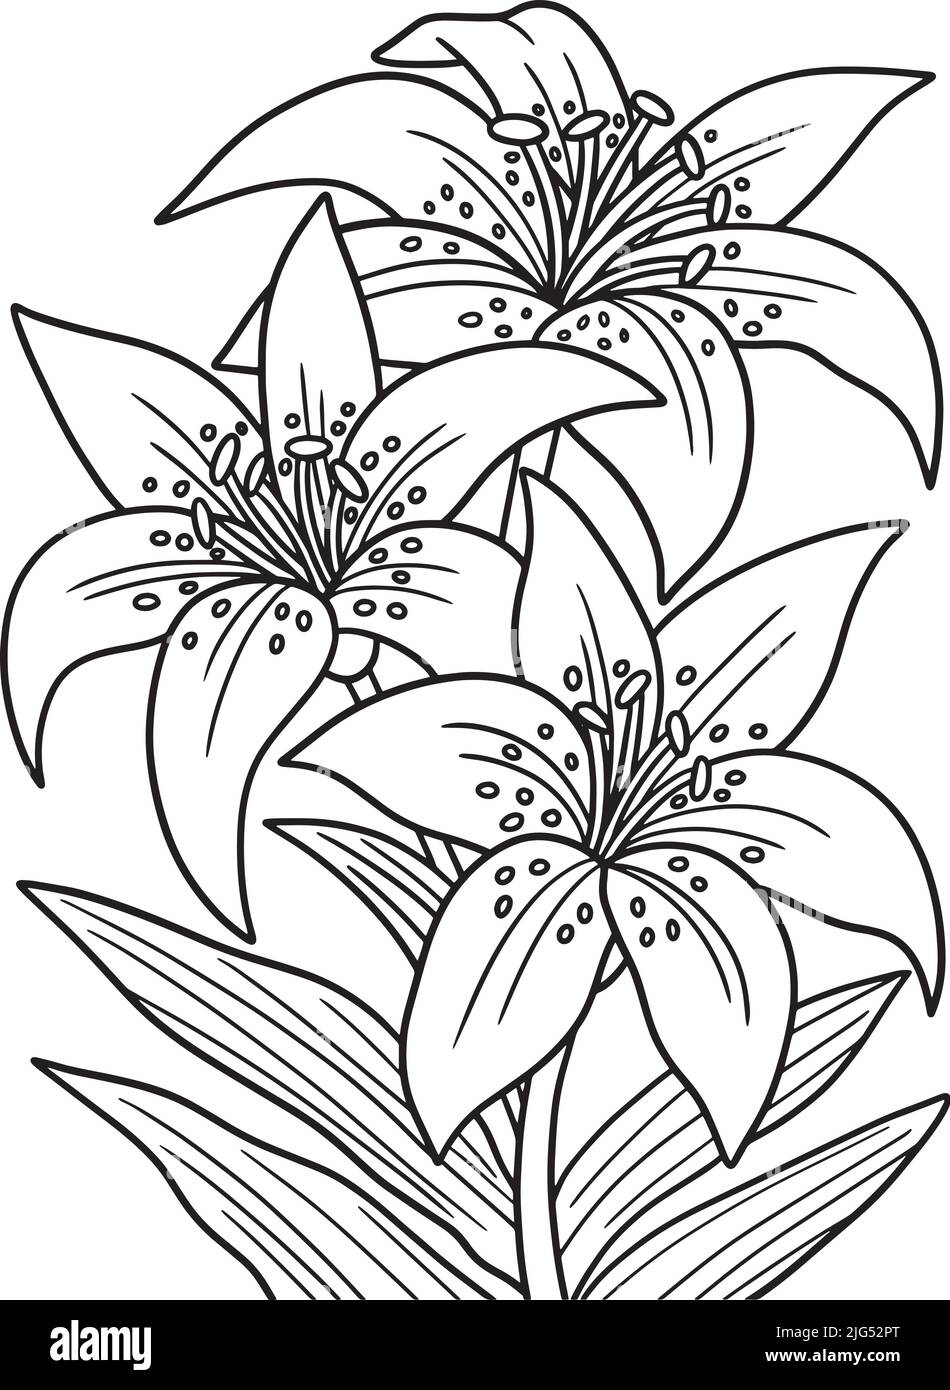 Lilies Flower Coloring Page for Adults Stock Vector Image & Art ...